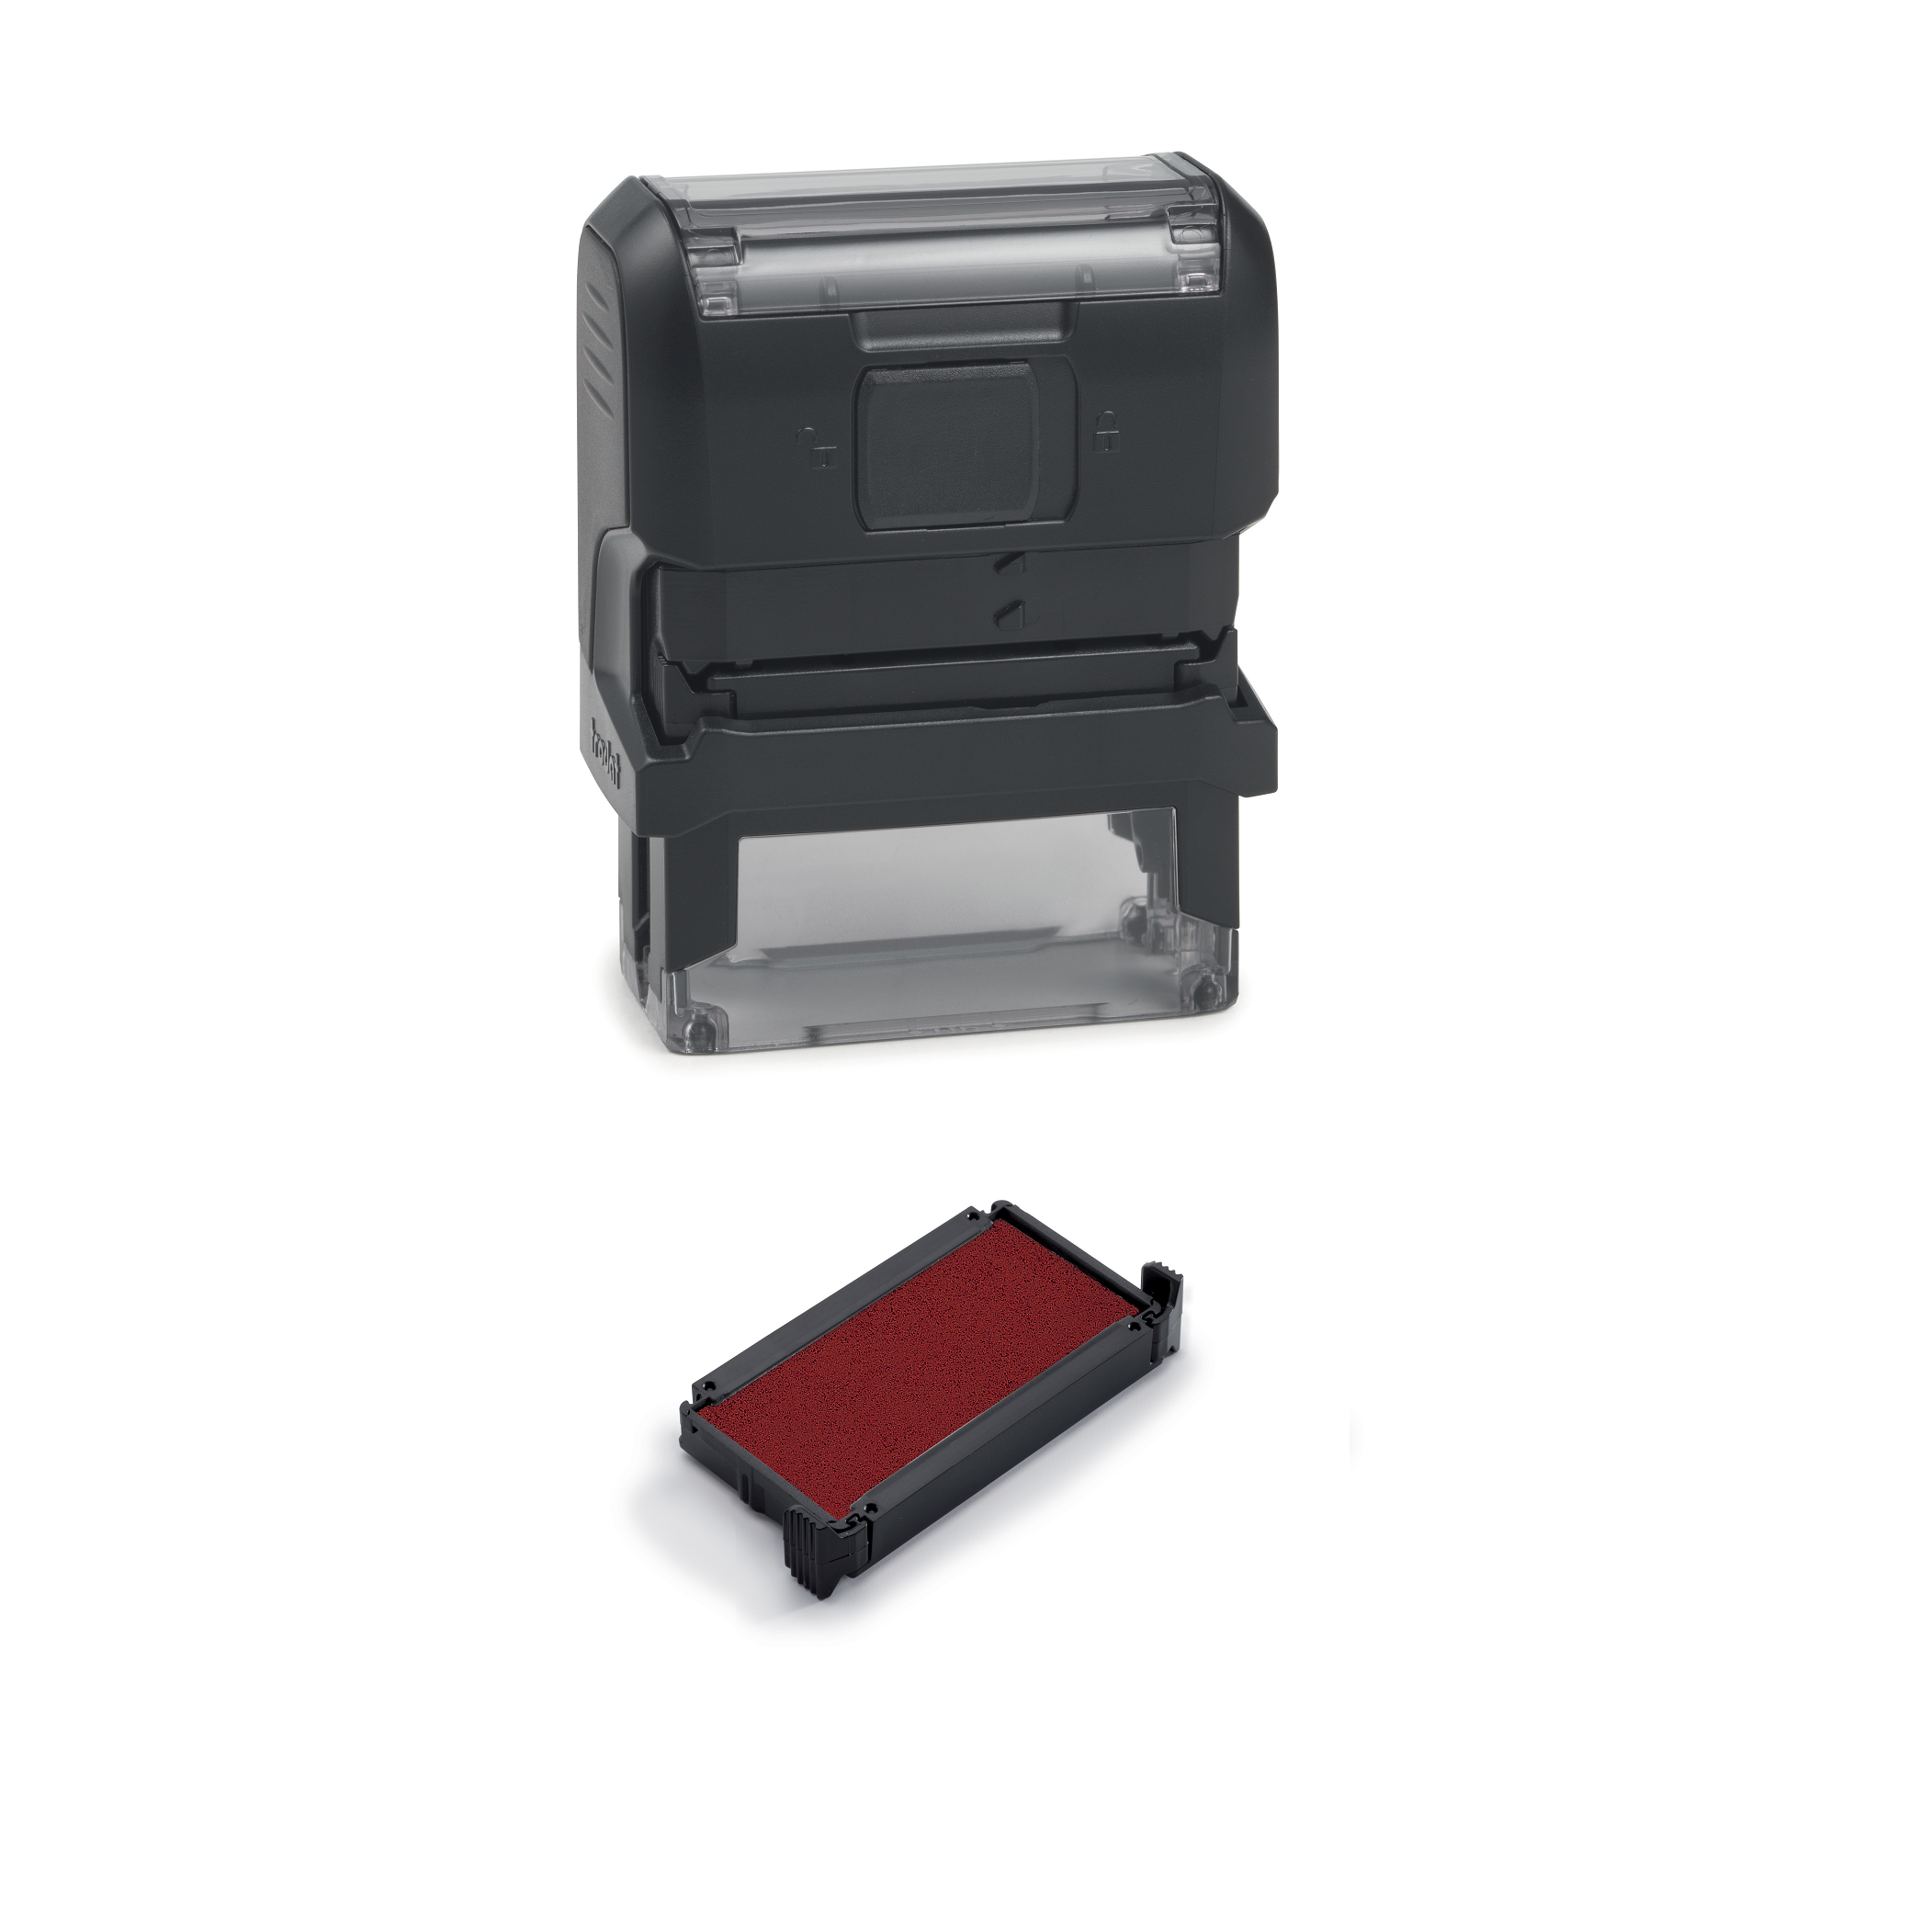 Authorized By With Line On The Bottom Office Self Inking Rubber Stamp